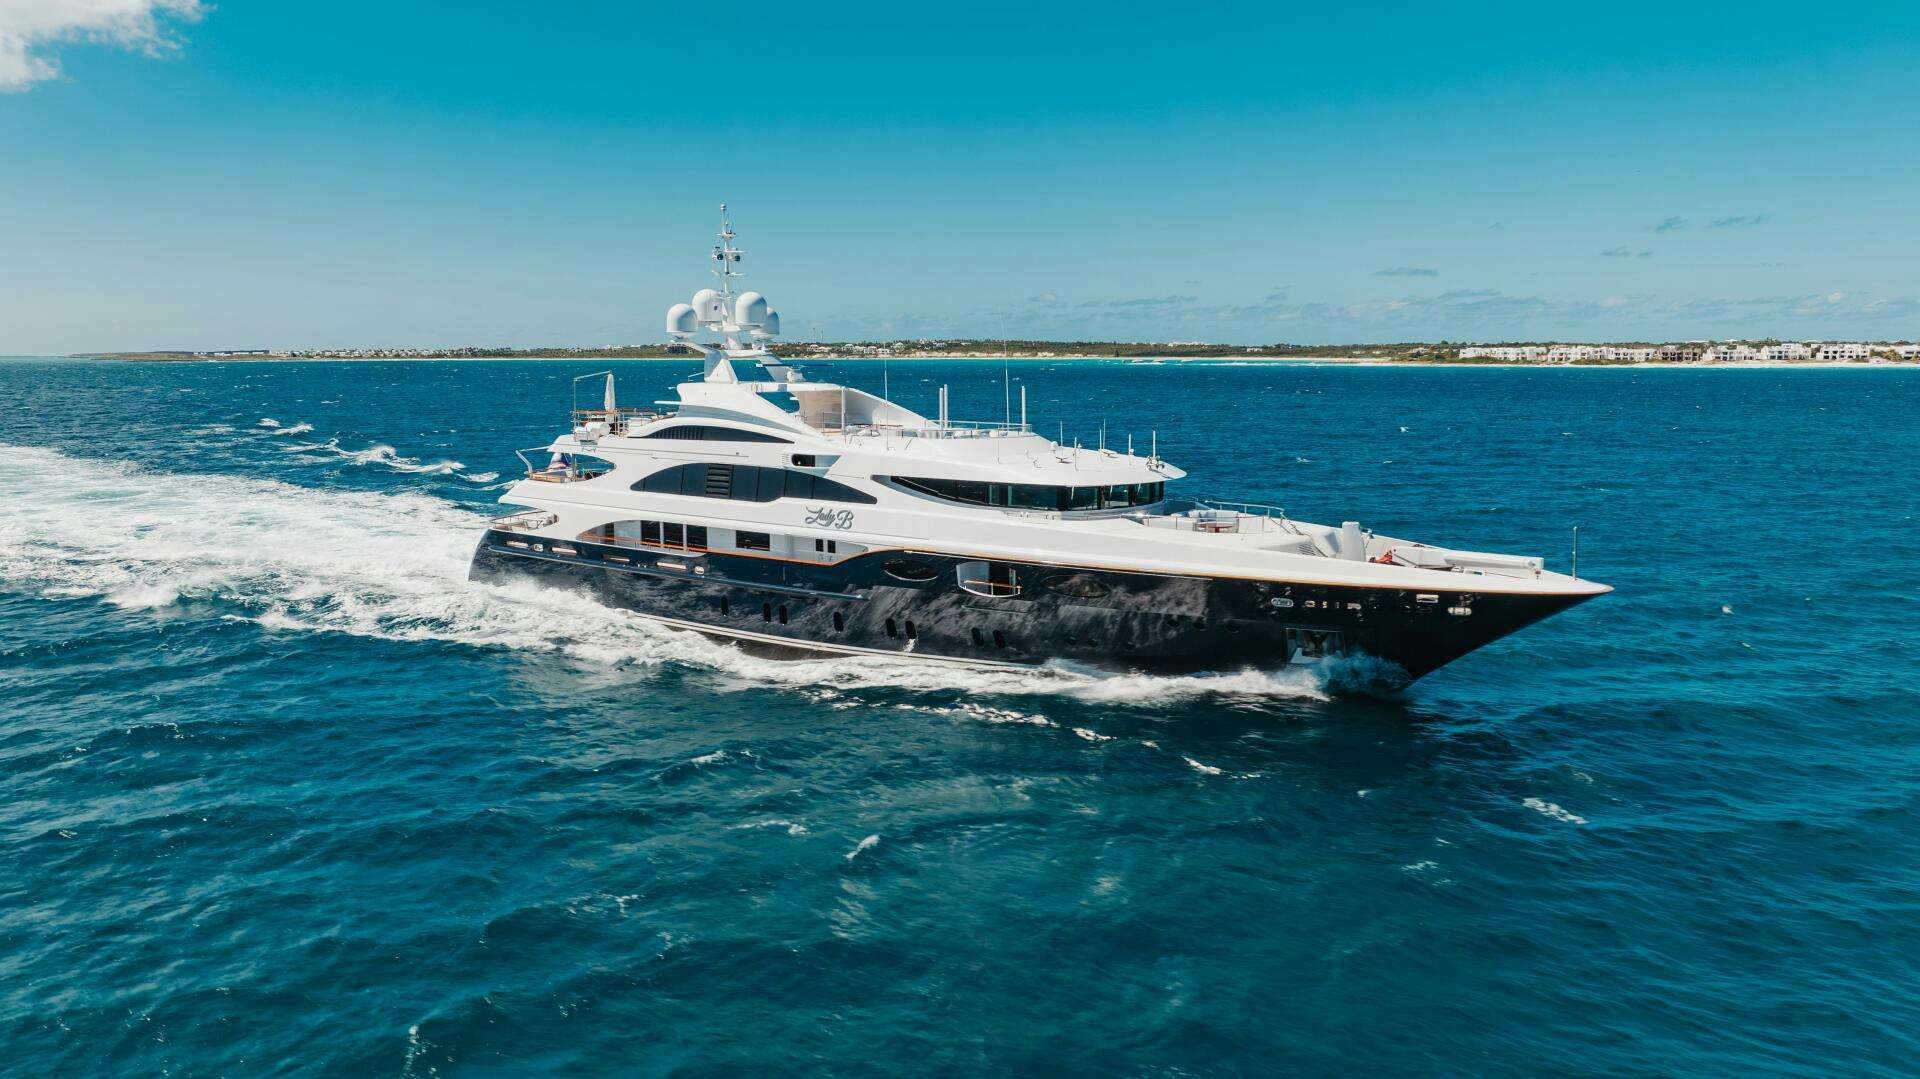 Lady b
Yacht for Sale